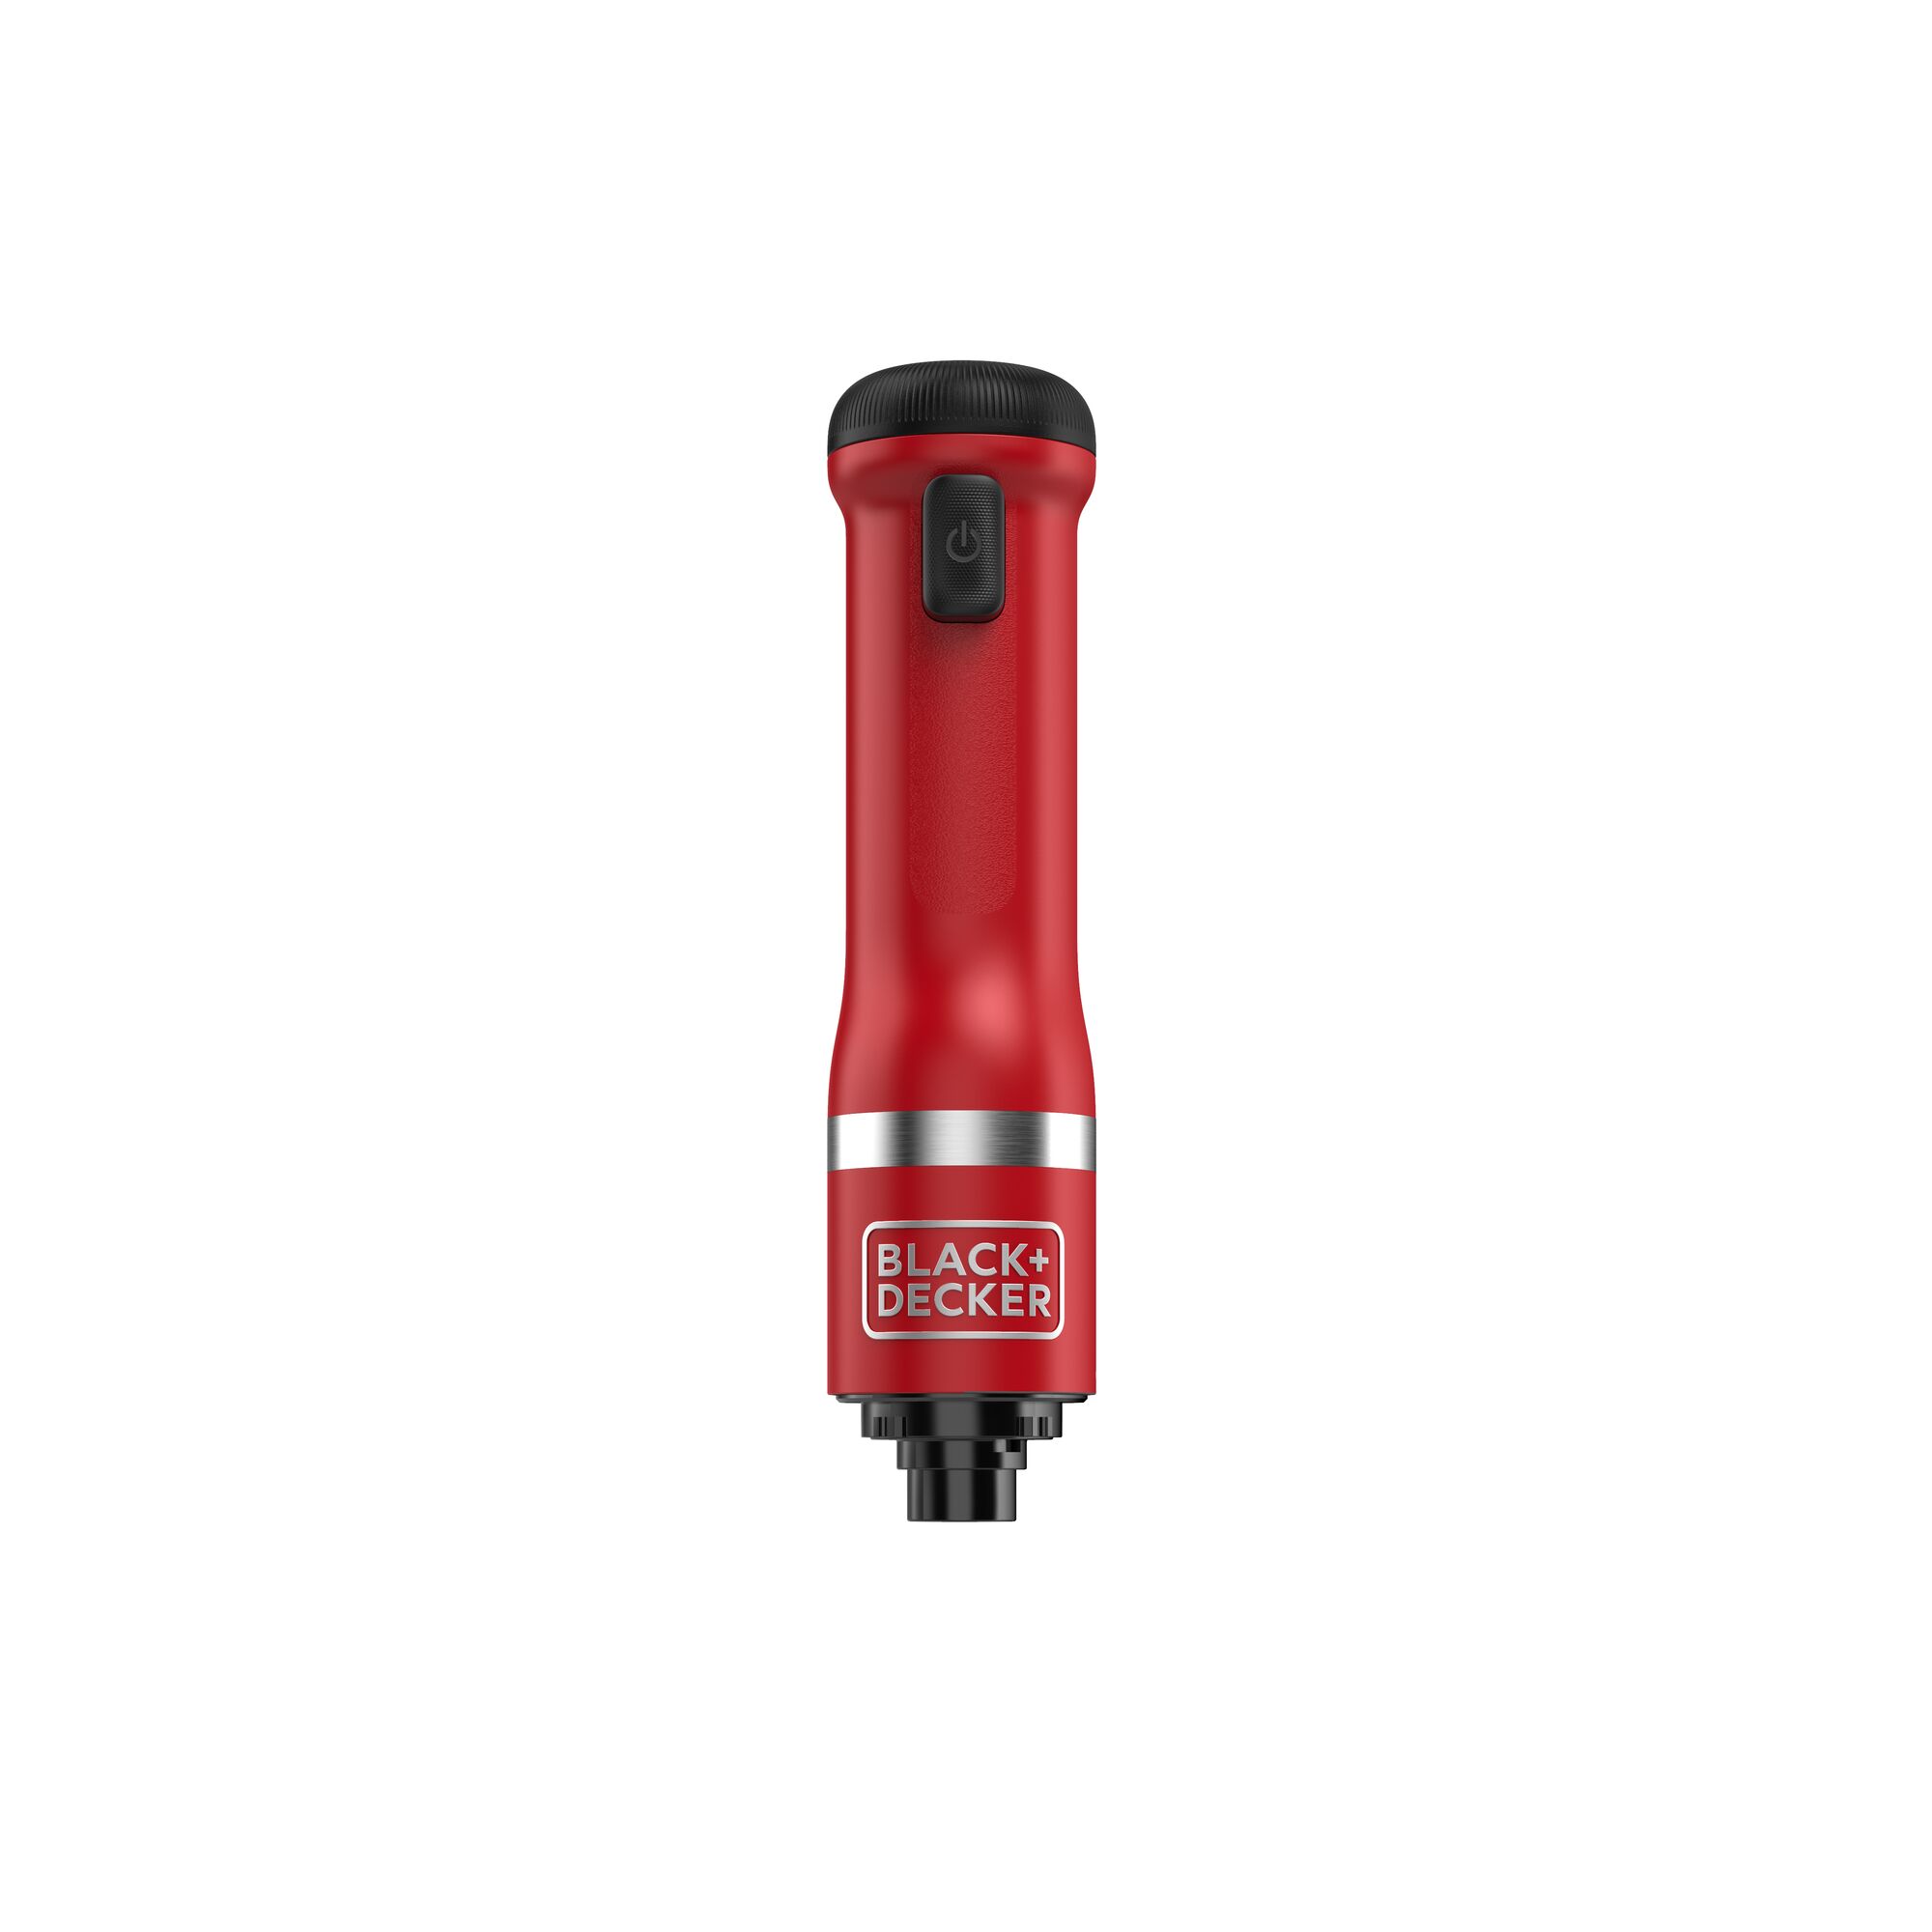 Profile front view of the red, BLACK+DECKER kitchen wand base